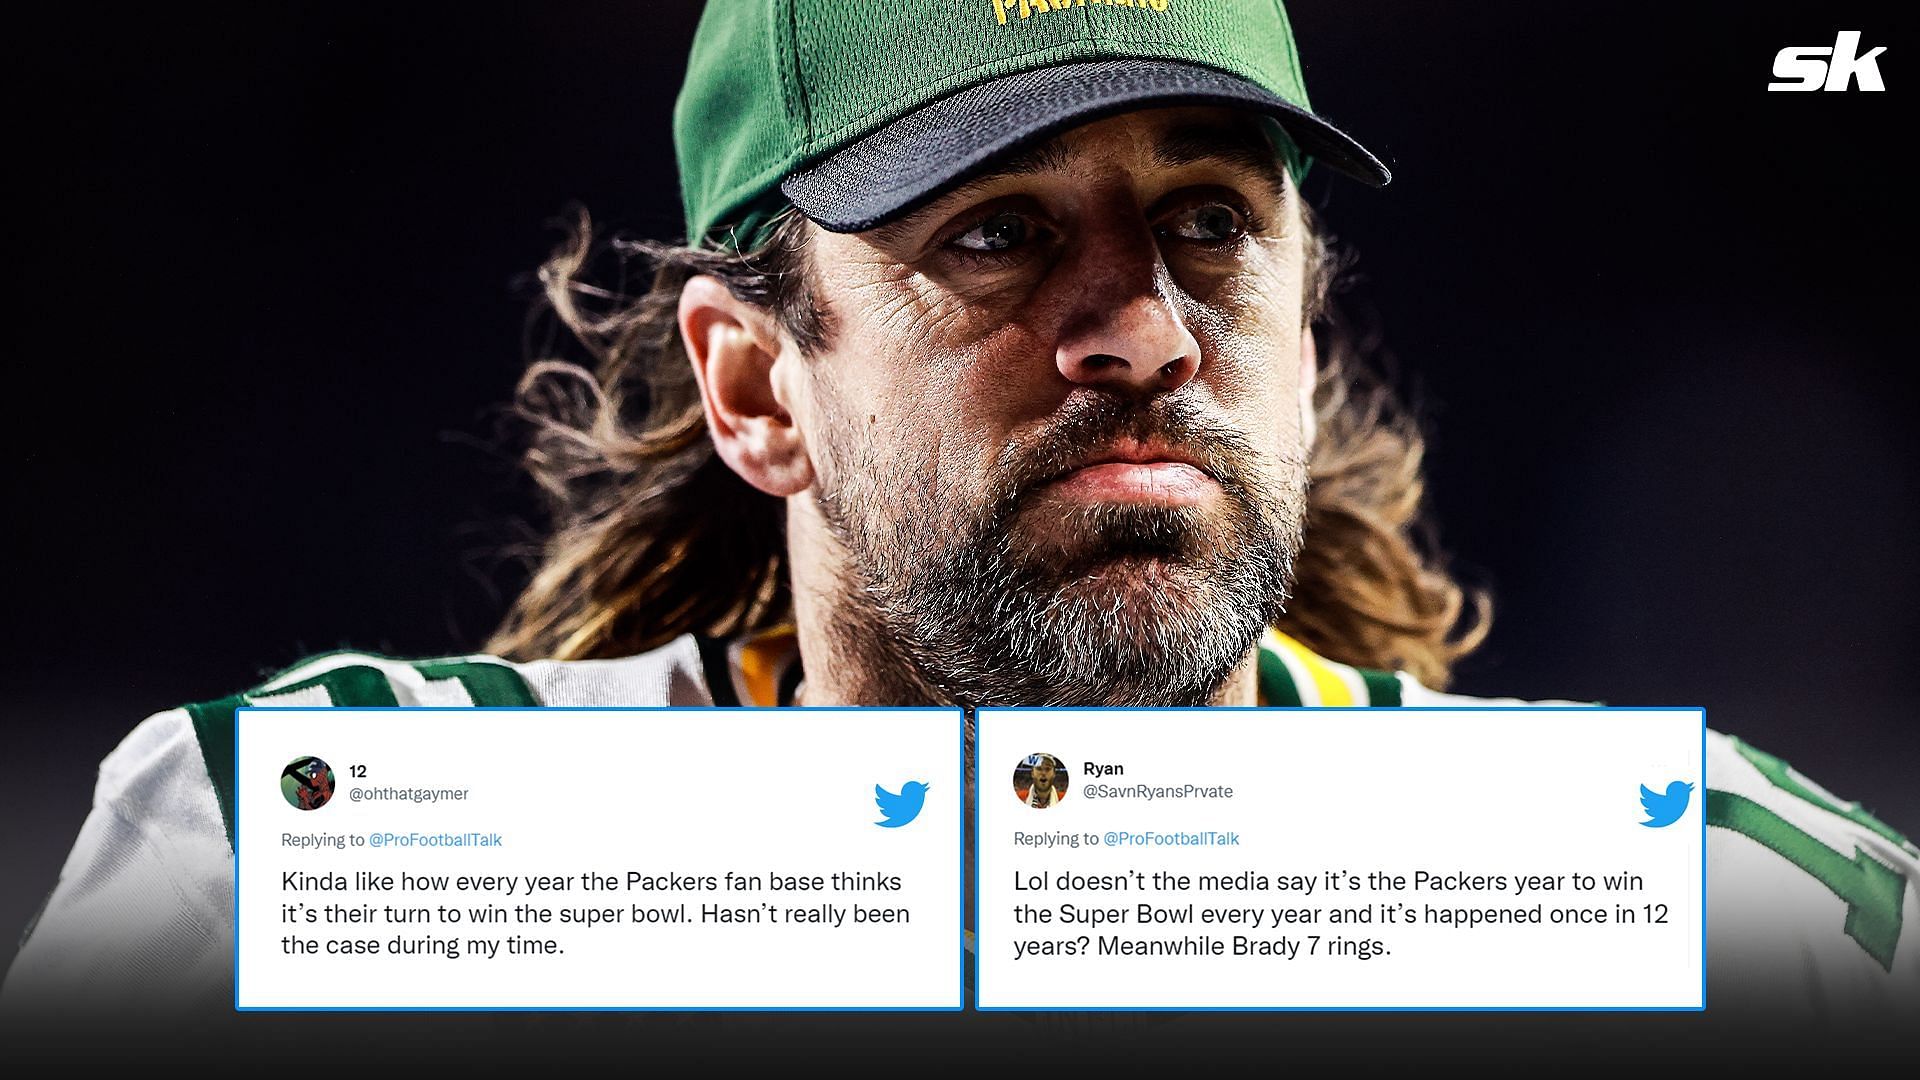 NFL fans react to Green Bay Packers QB Aaron Rodgers